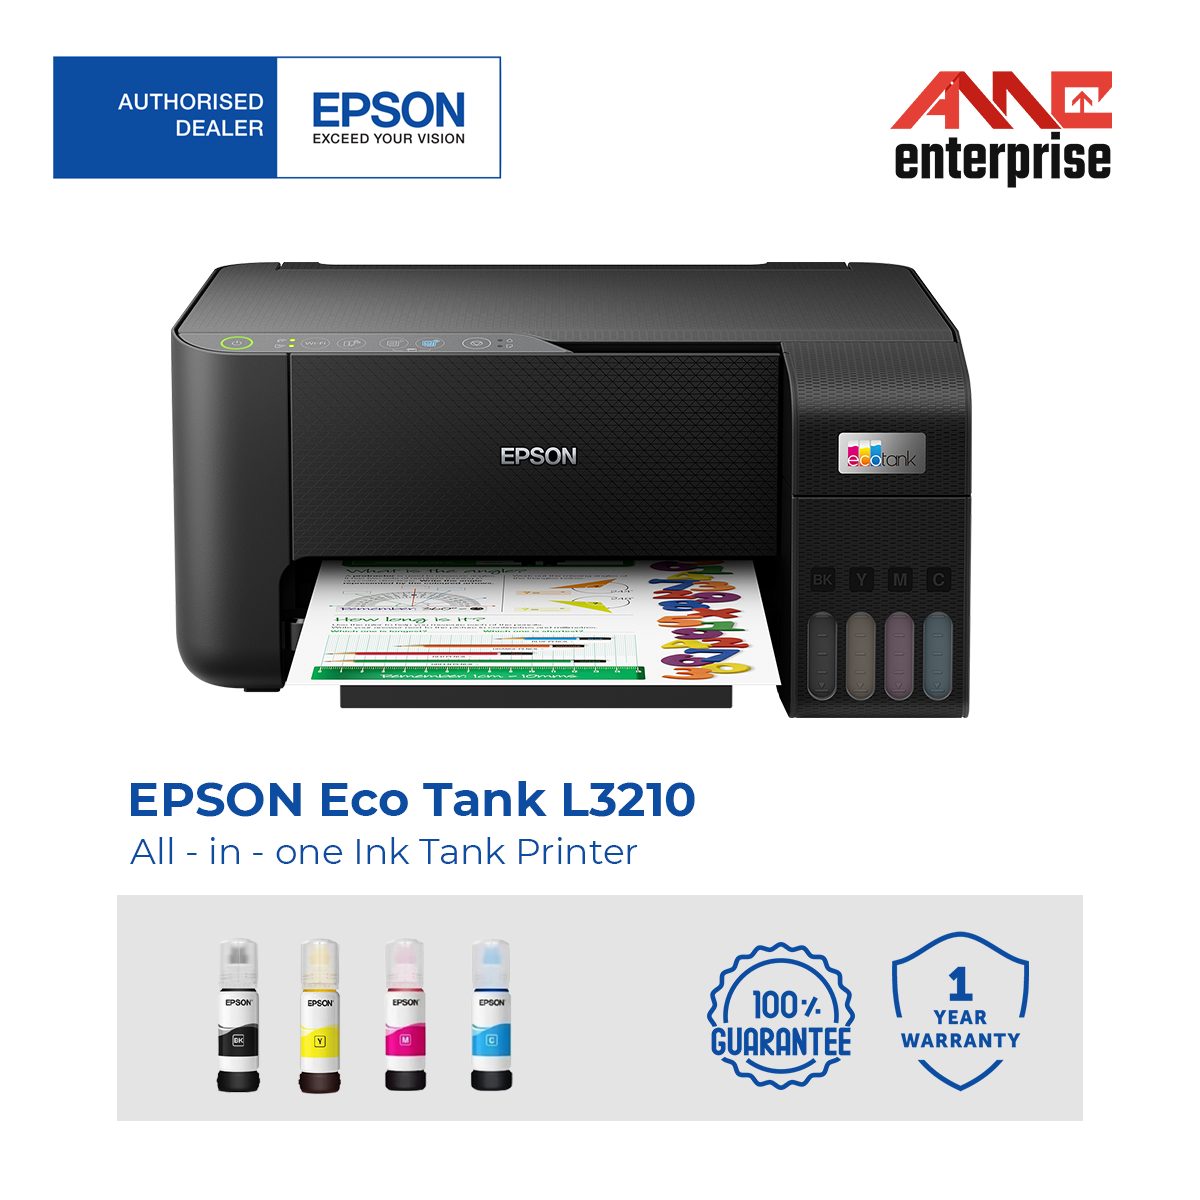 Epson EcoTank L3210 A4 All-in-One Ink Tank Printer (1)